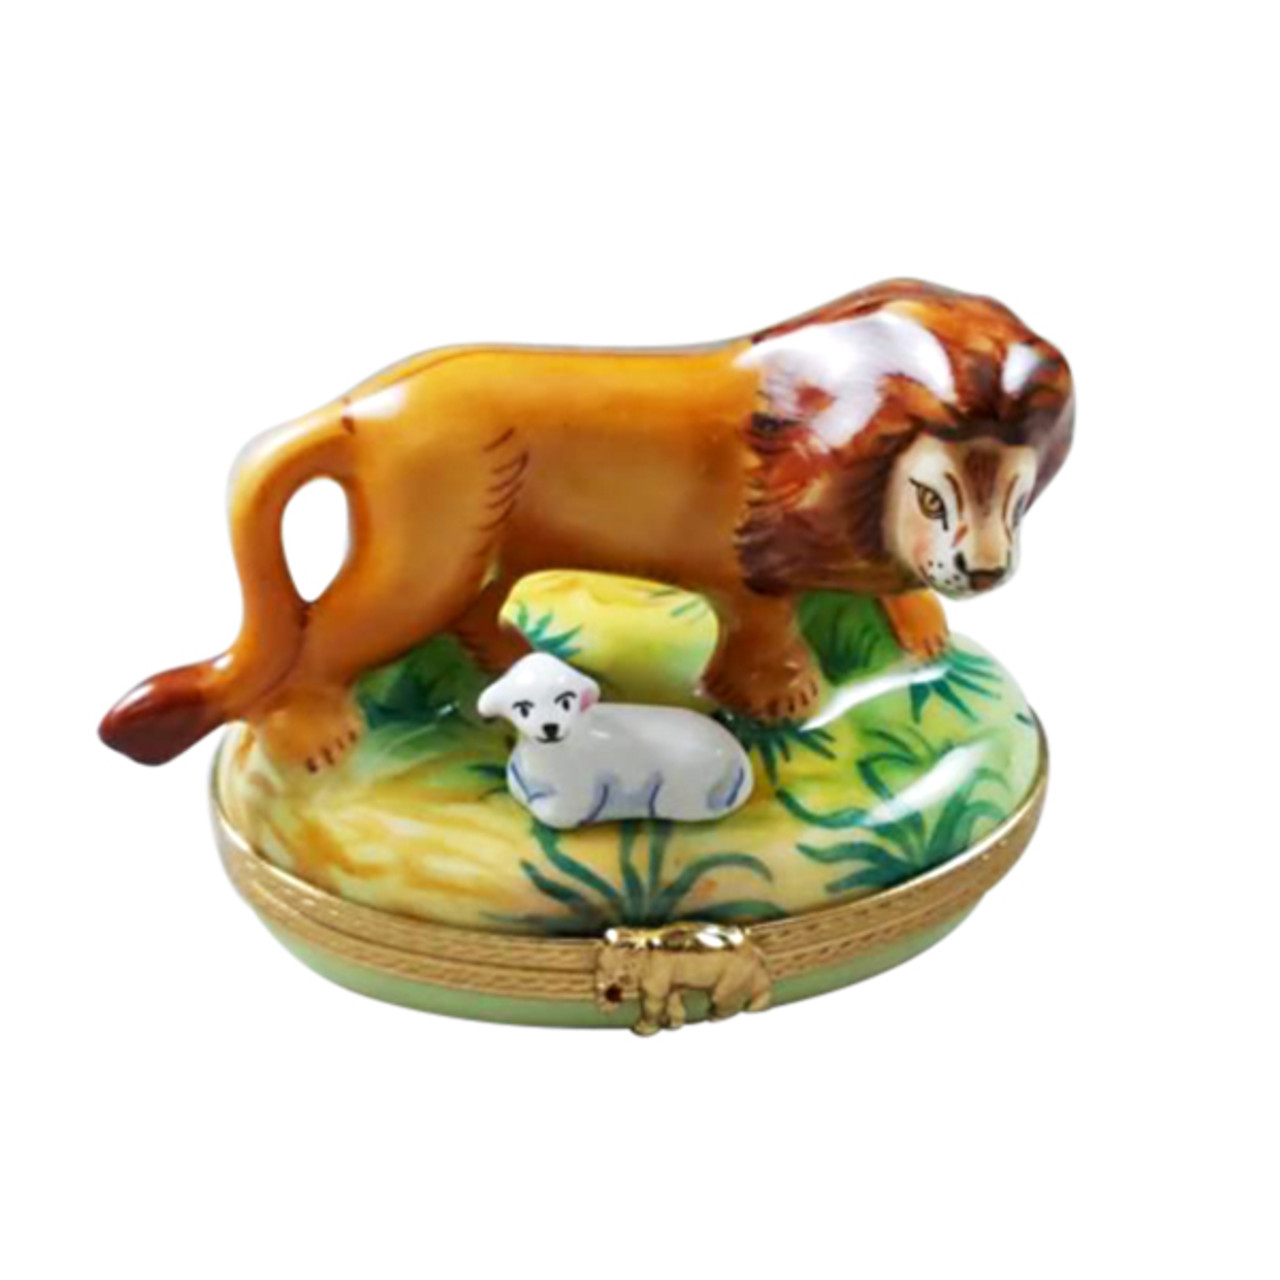 LION WITH REMOVABLE LAMB Limoges Box